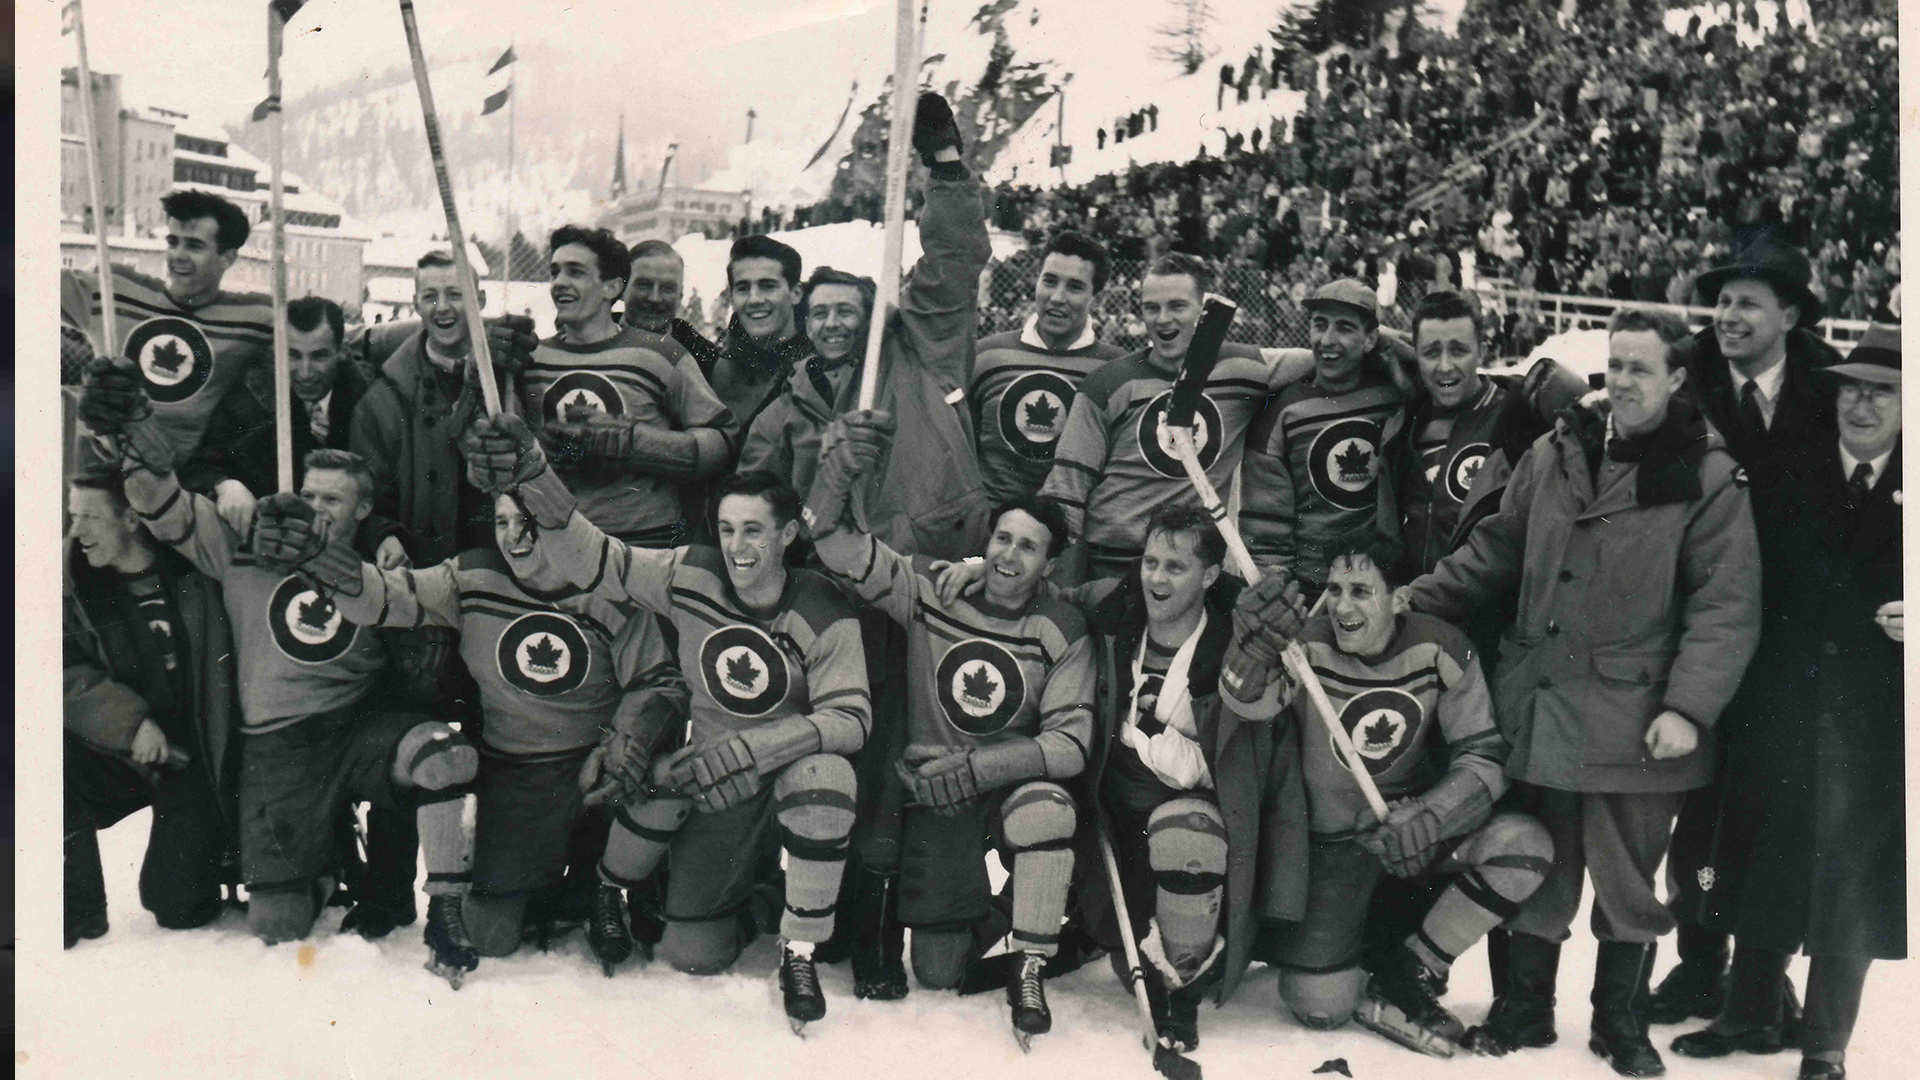 RCAF Flyers after winning gold2